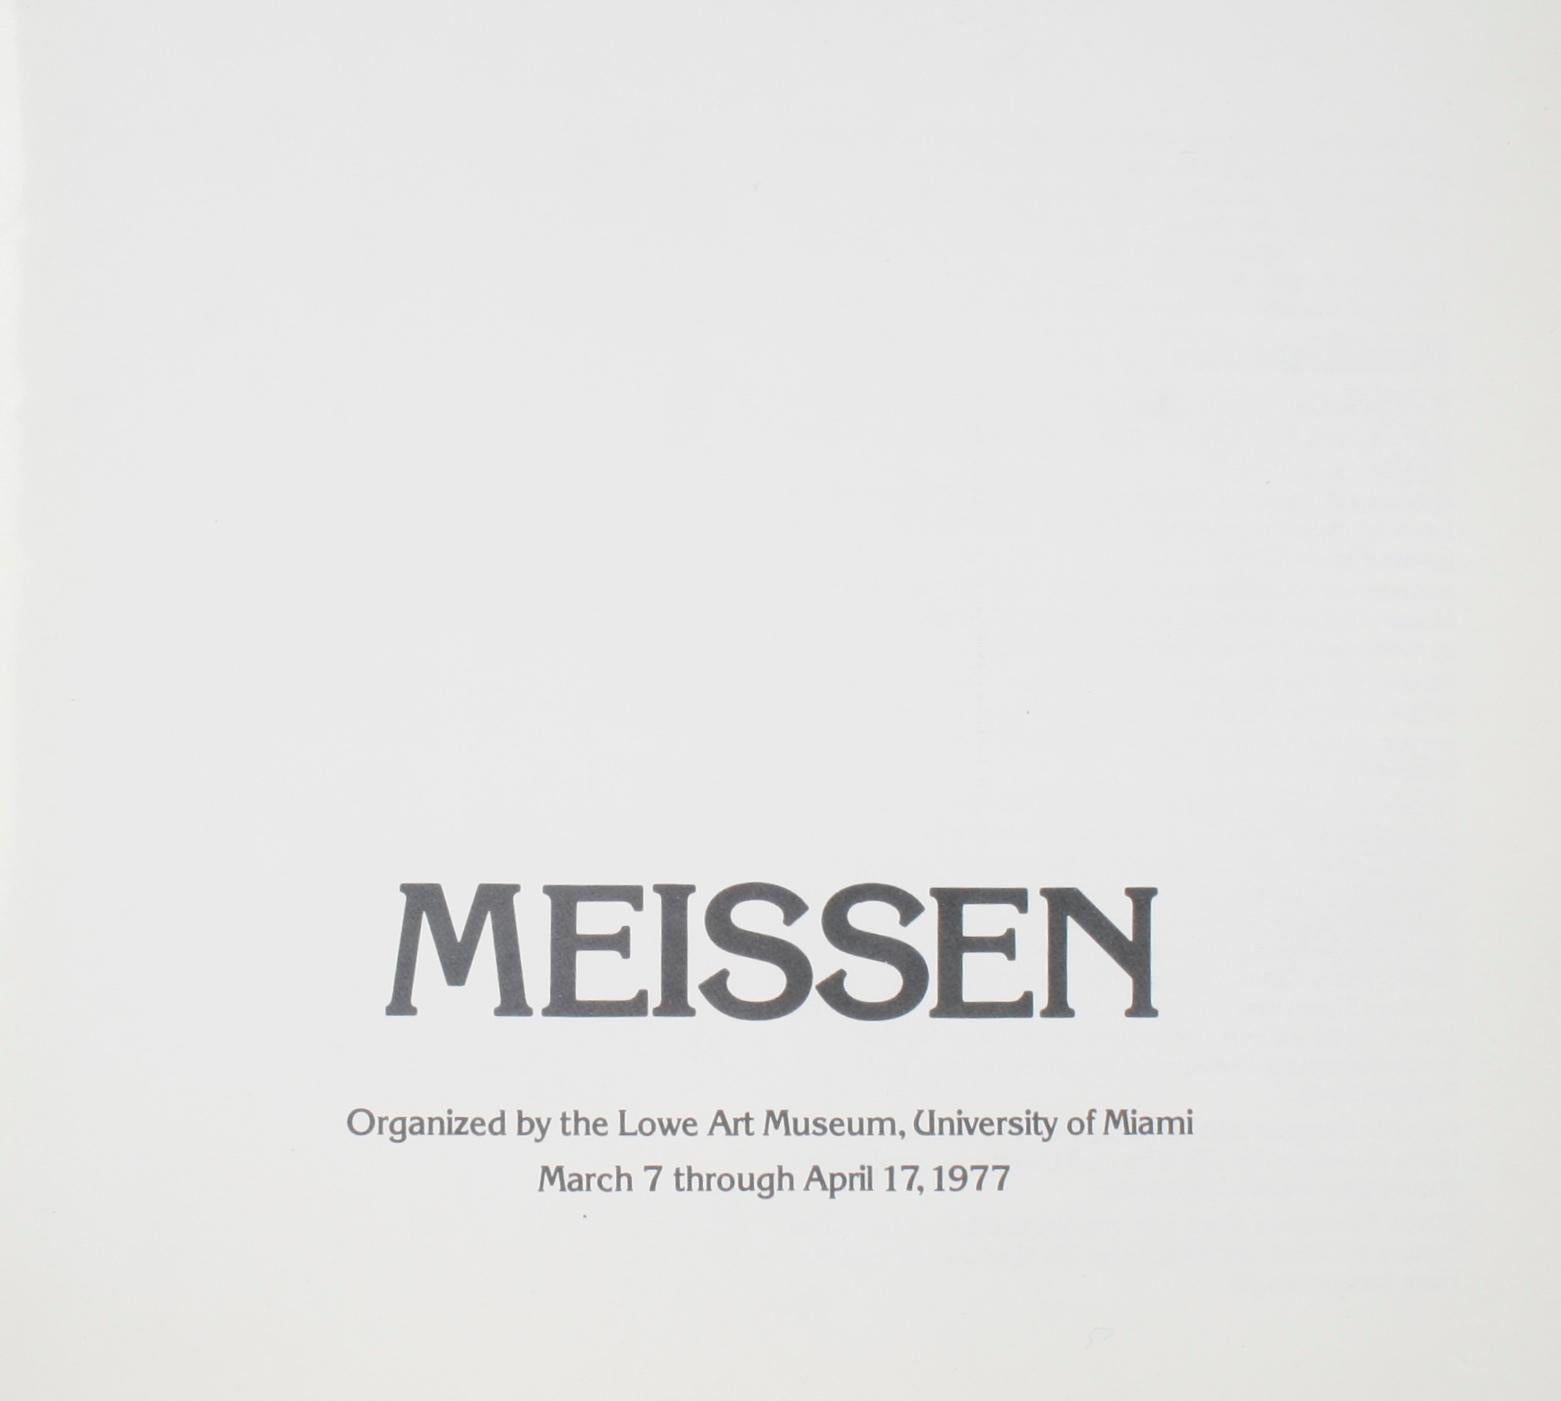 Meissen, organized by the Lowe Art Museum, University of Miami, 1977. 1st Ed softcover. A museum exhibition that started with a core donation from Mr. & Mrs. Harry Zuckerman and was augmented by other pieces on loan fro private collectors and other